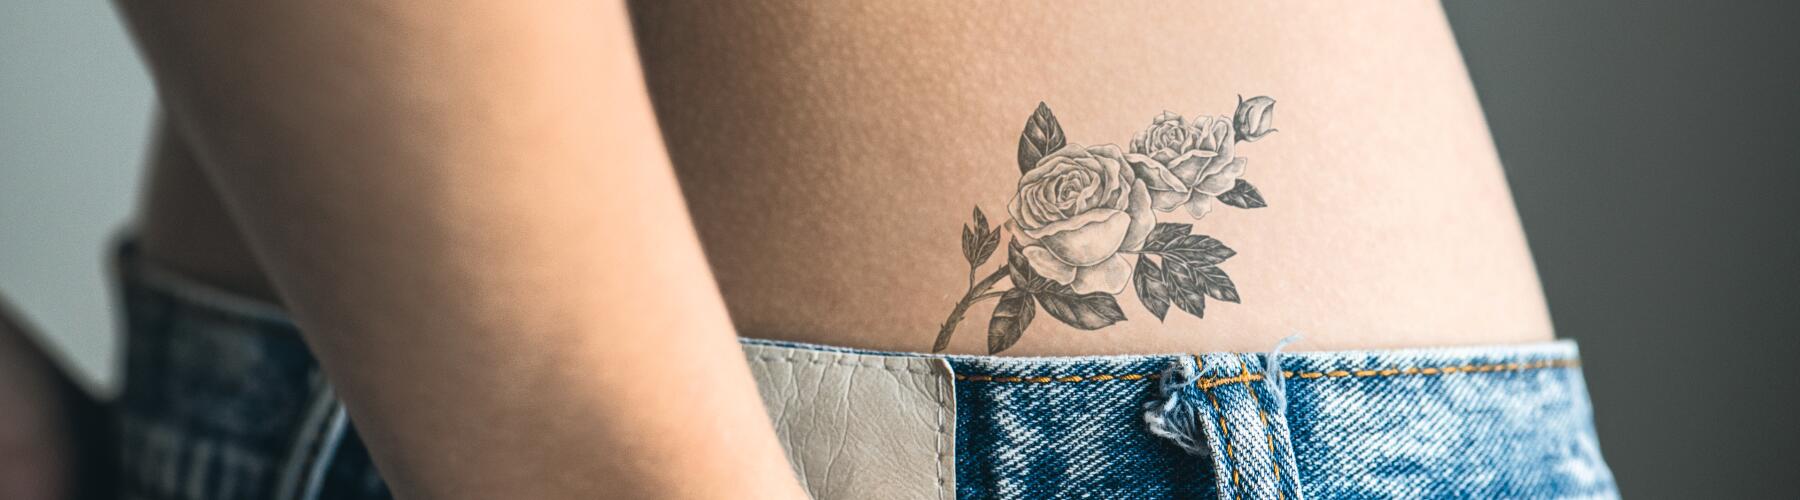 ?AD_TATTOOS_WOMAN-HIP-FLOWERS_LARGE?